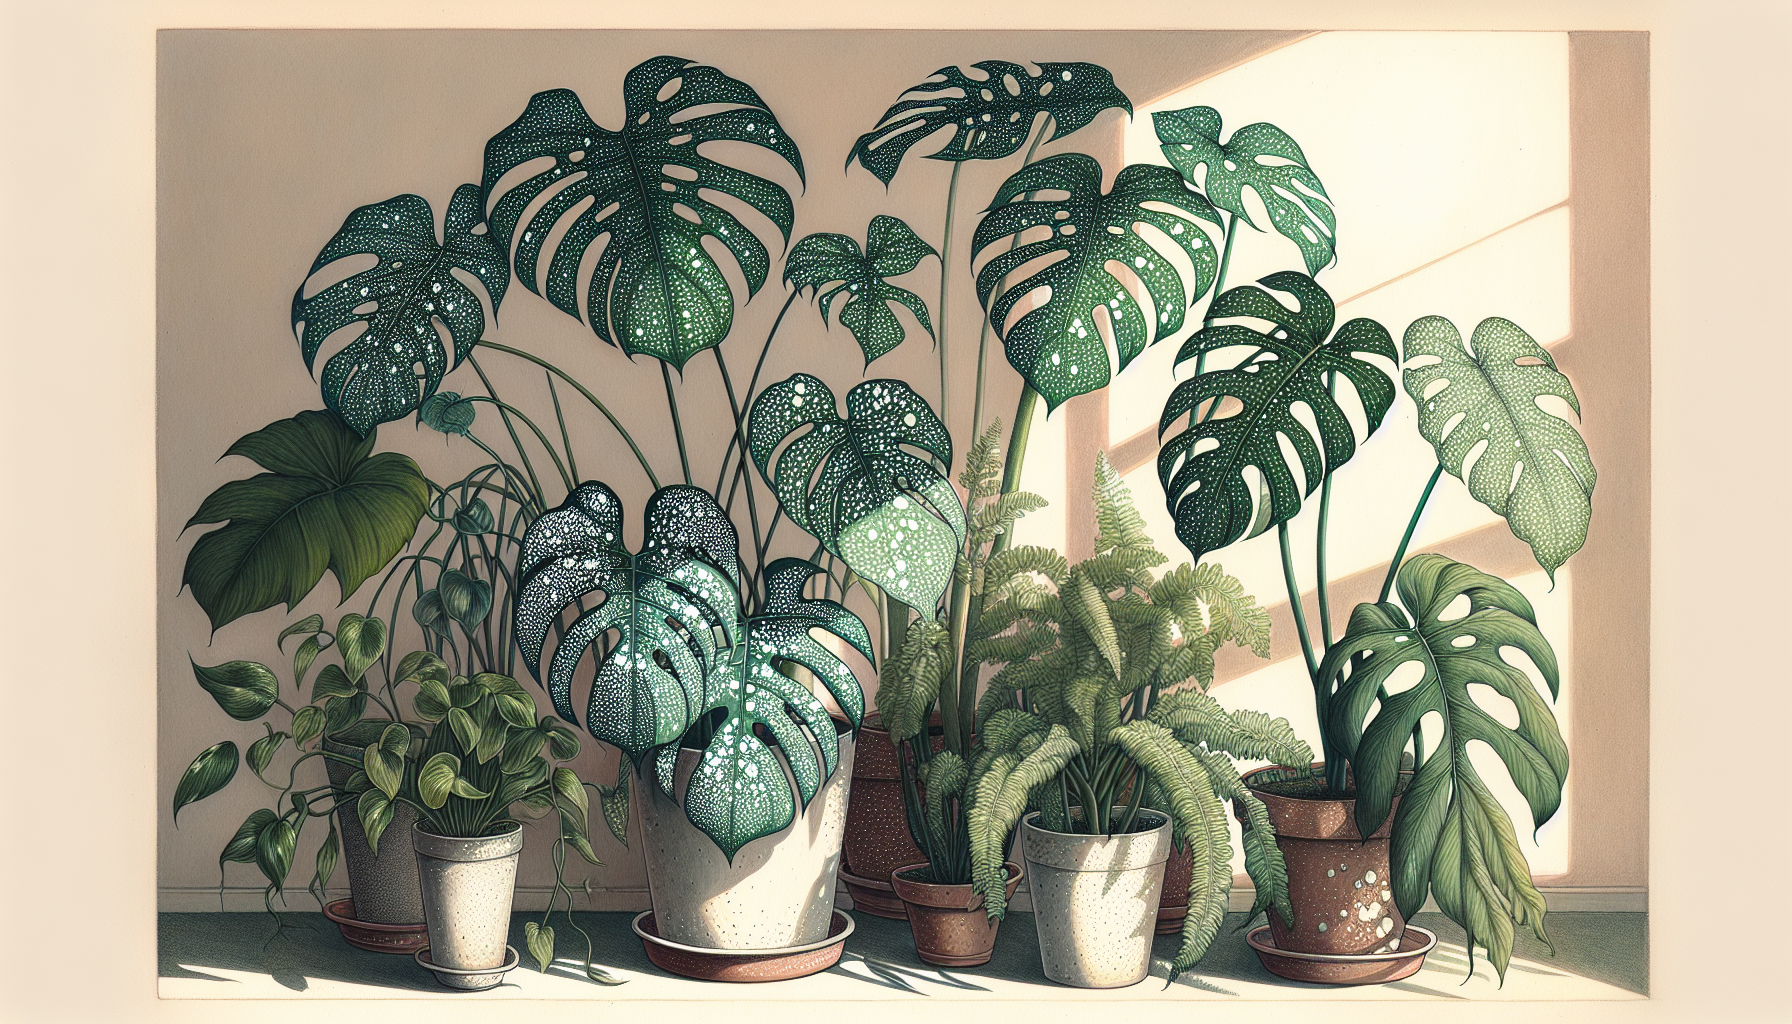 Illustration of various indoor plants with white spots on their leaves